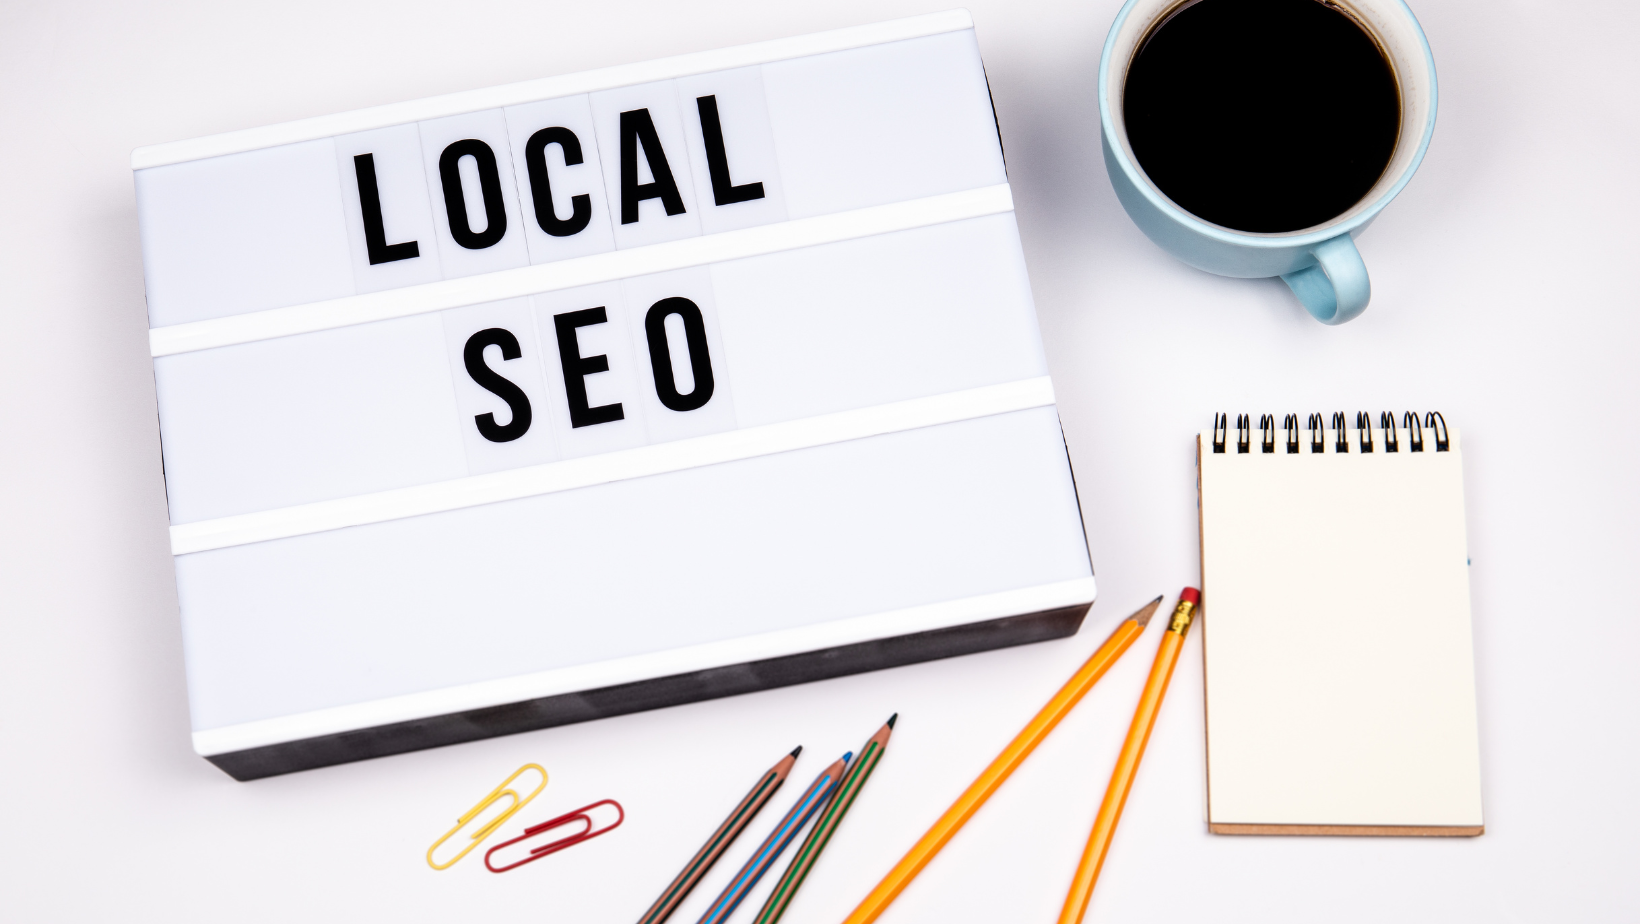 Local SEO: Boost Your Business and Increase Local Visibility. Contact us today!